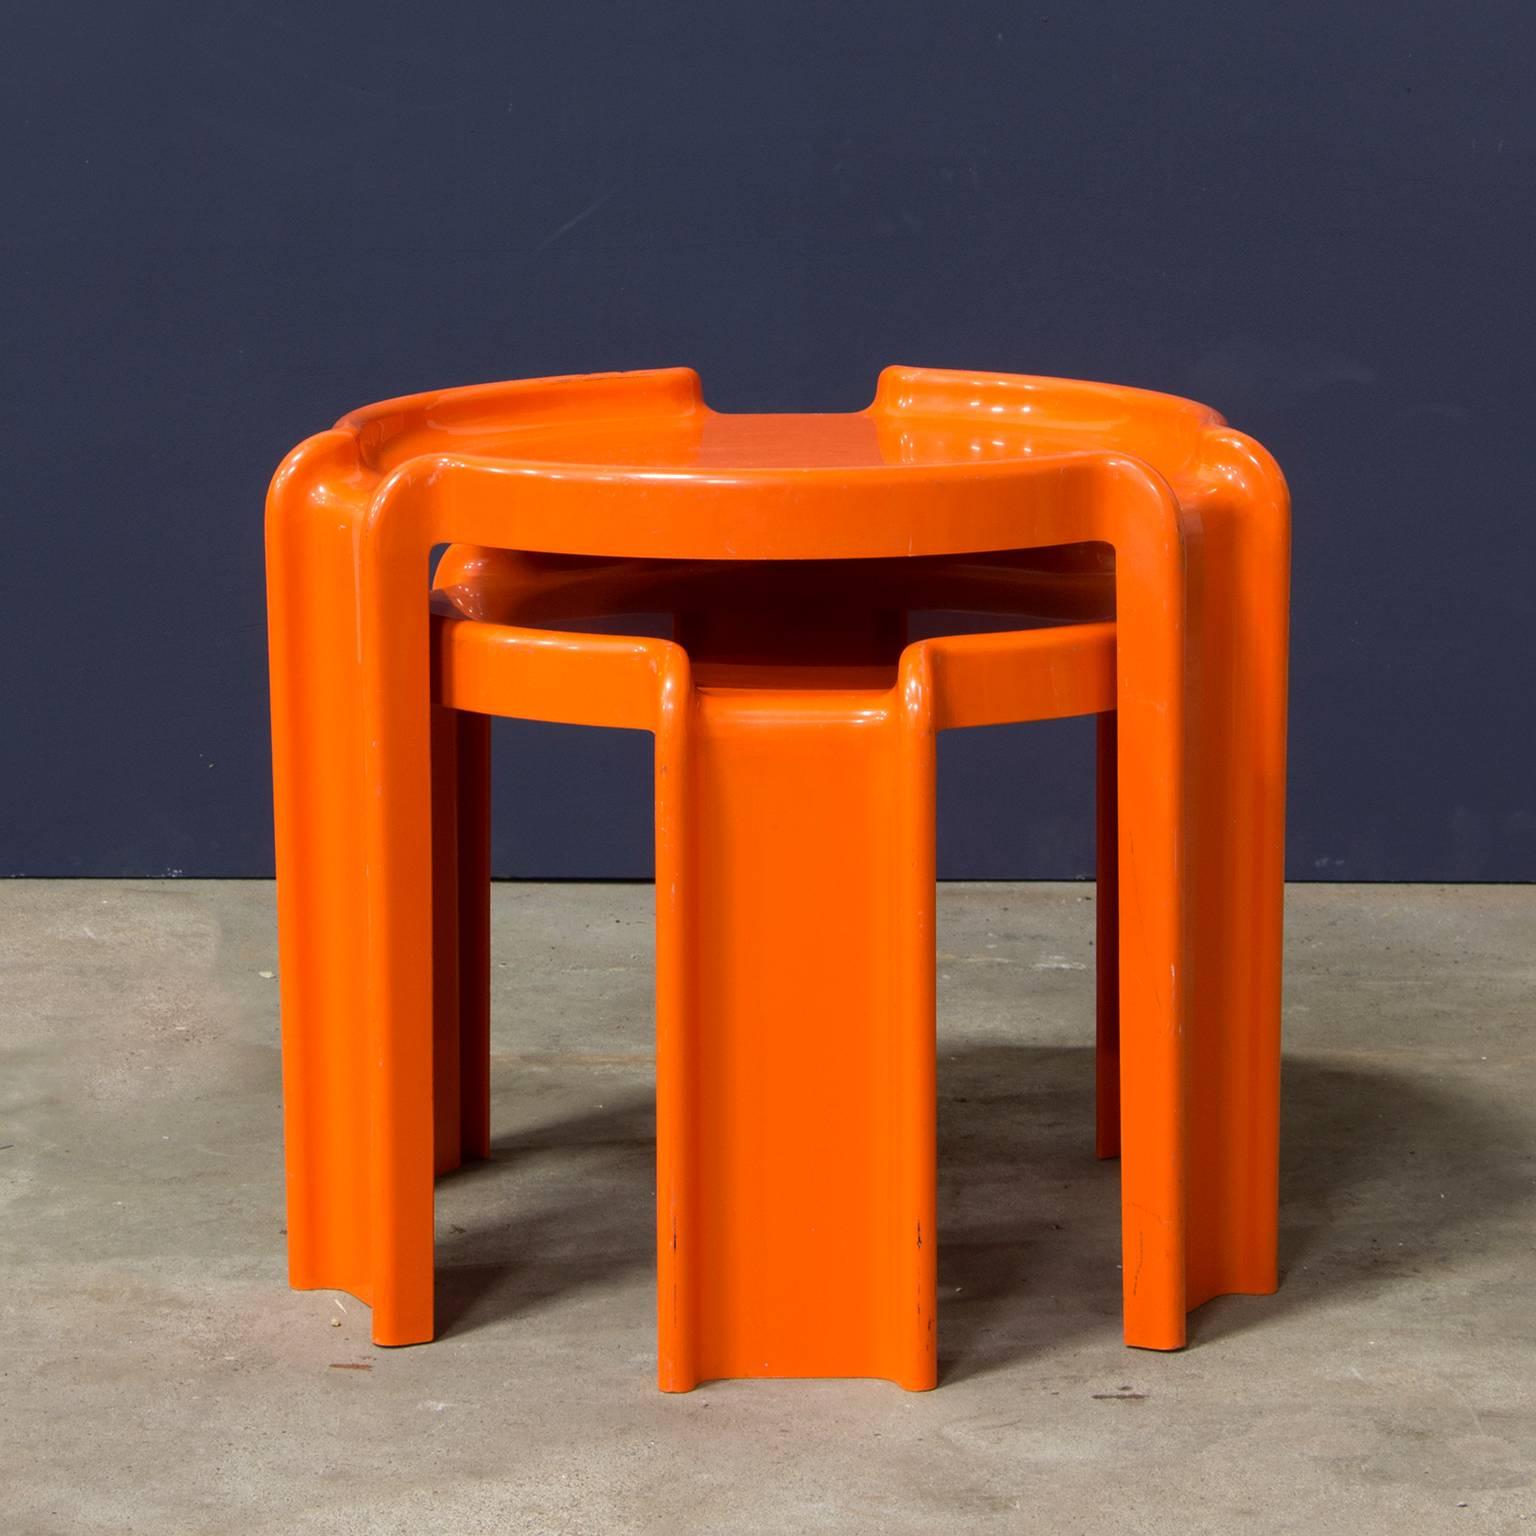 Set of two orange Kartell stackable side tables.
Beautiful bright color. Both tables have some traces of wear and a bit of paint on the rim. The smallest table has a little crack (#8).

Measures: Height of highest table 41 cm.
Height of lowest table